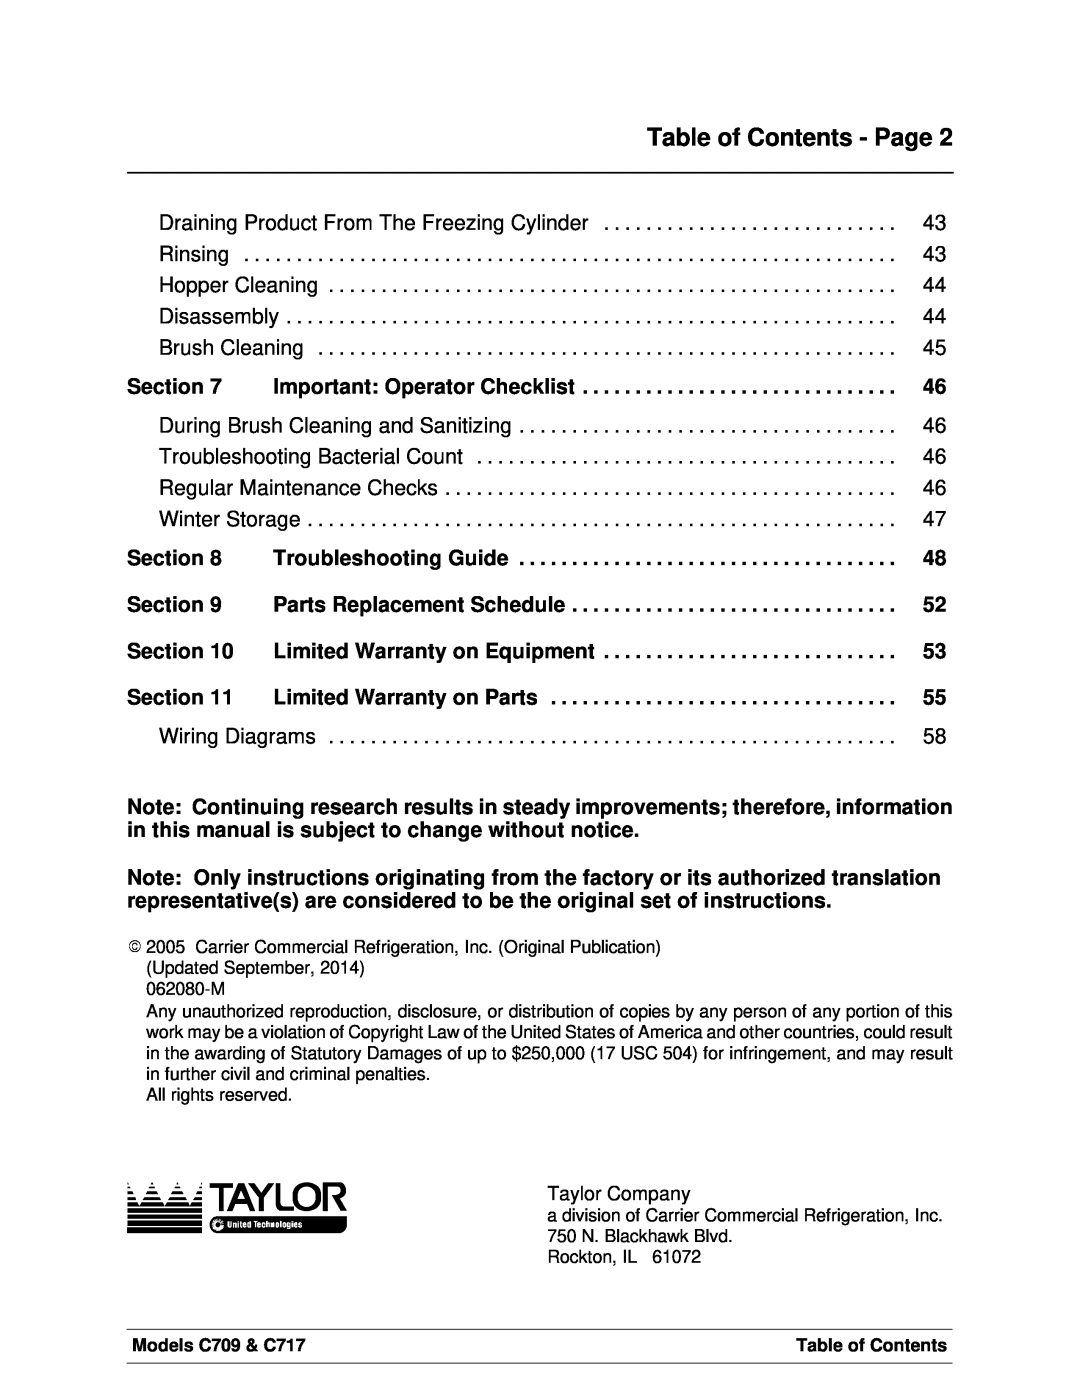 Taylor C709, C717 manual Table of Contents - Page 